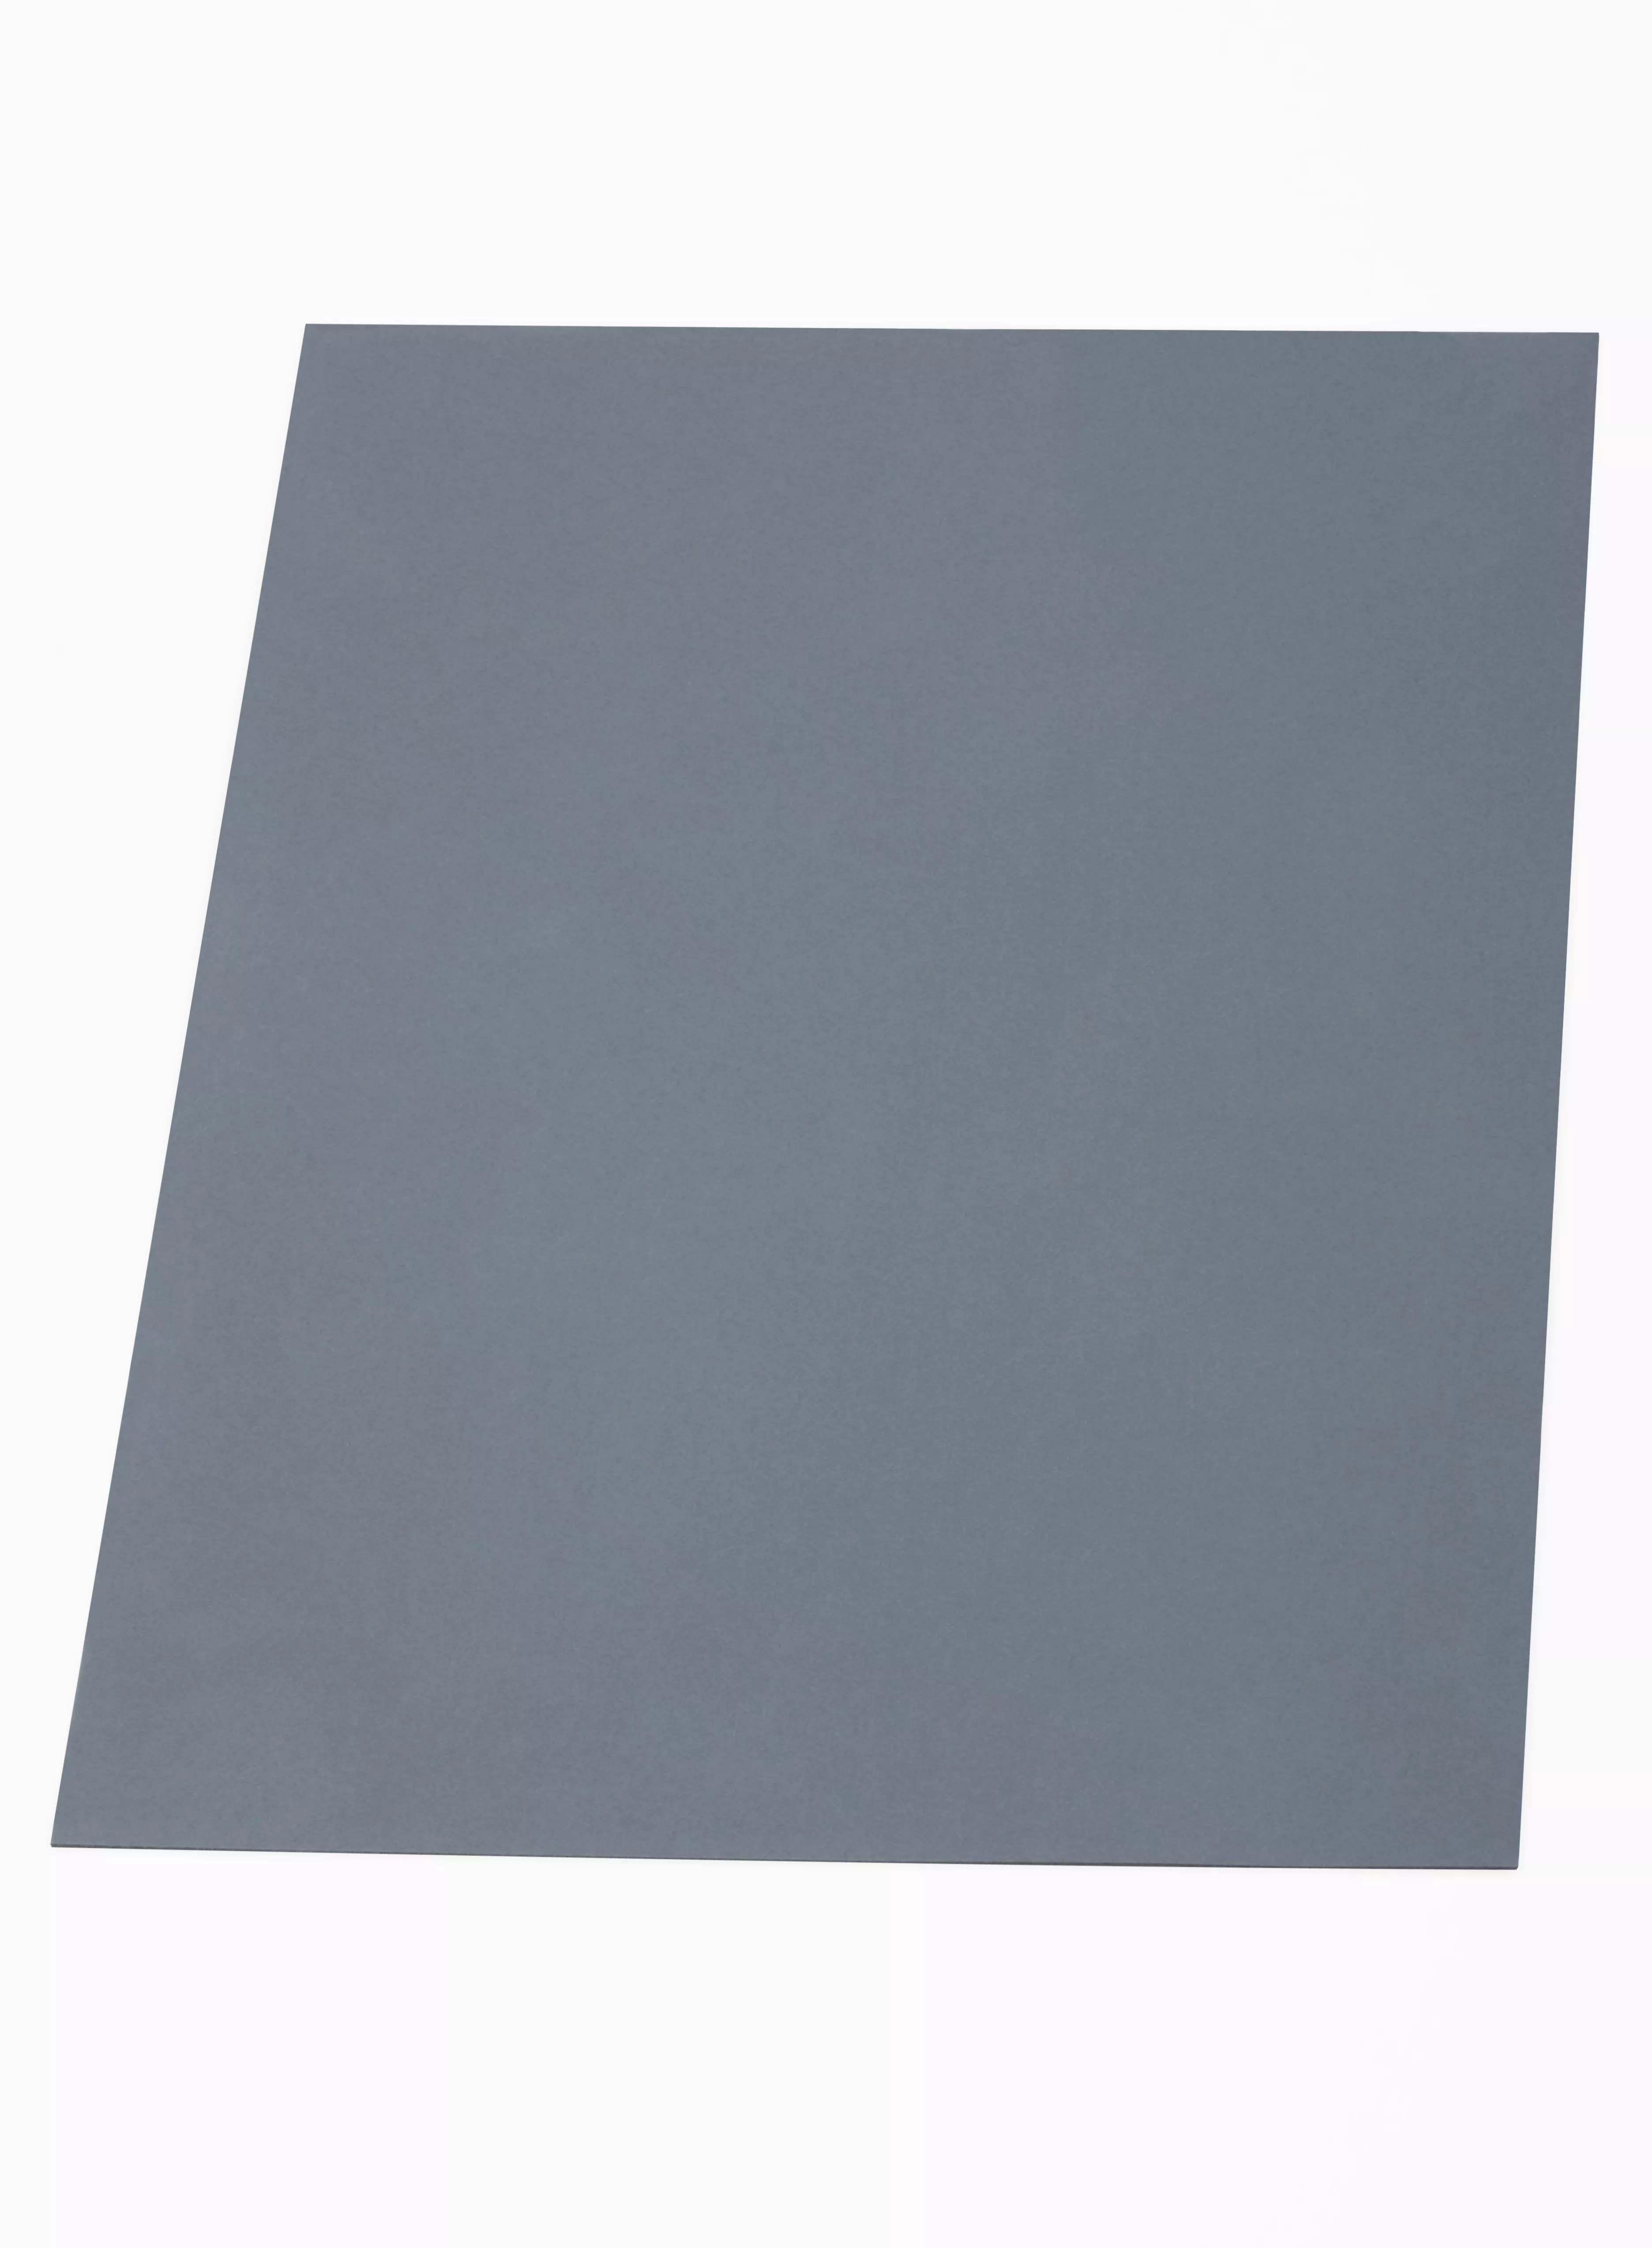 3M™ Thermally Conductive Silicone Interface Pad 5549S, 210 mm x 155 mm x
1.0 mm